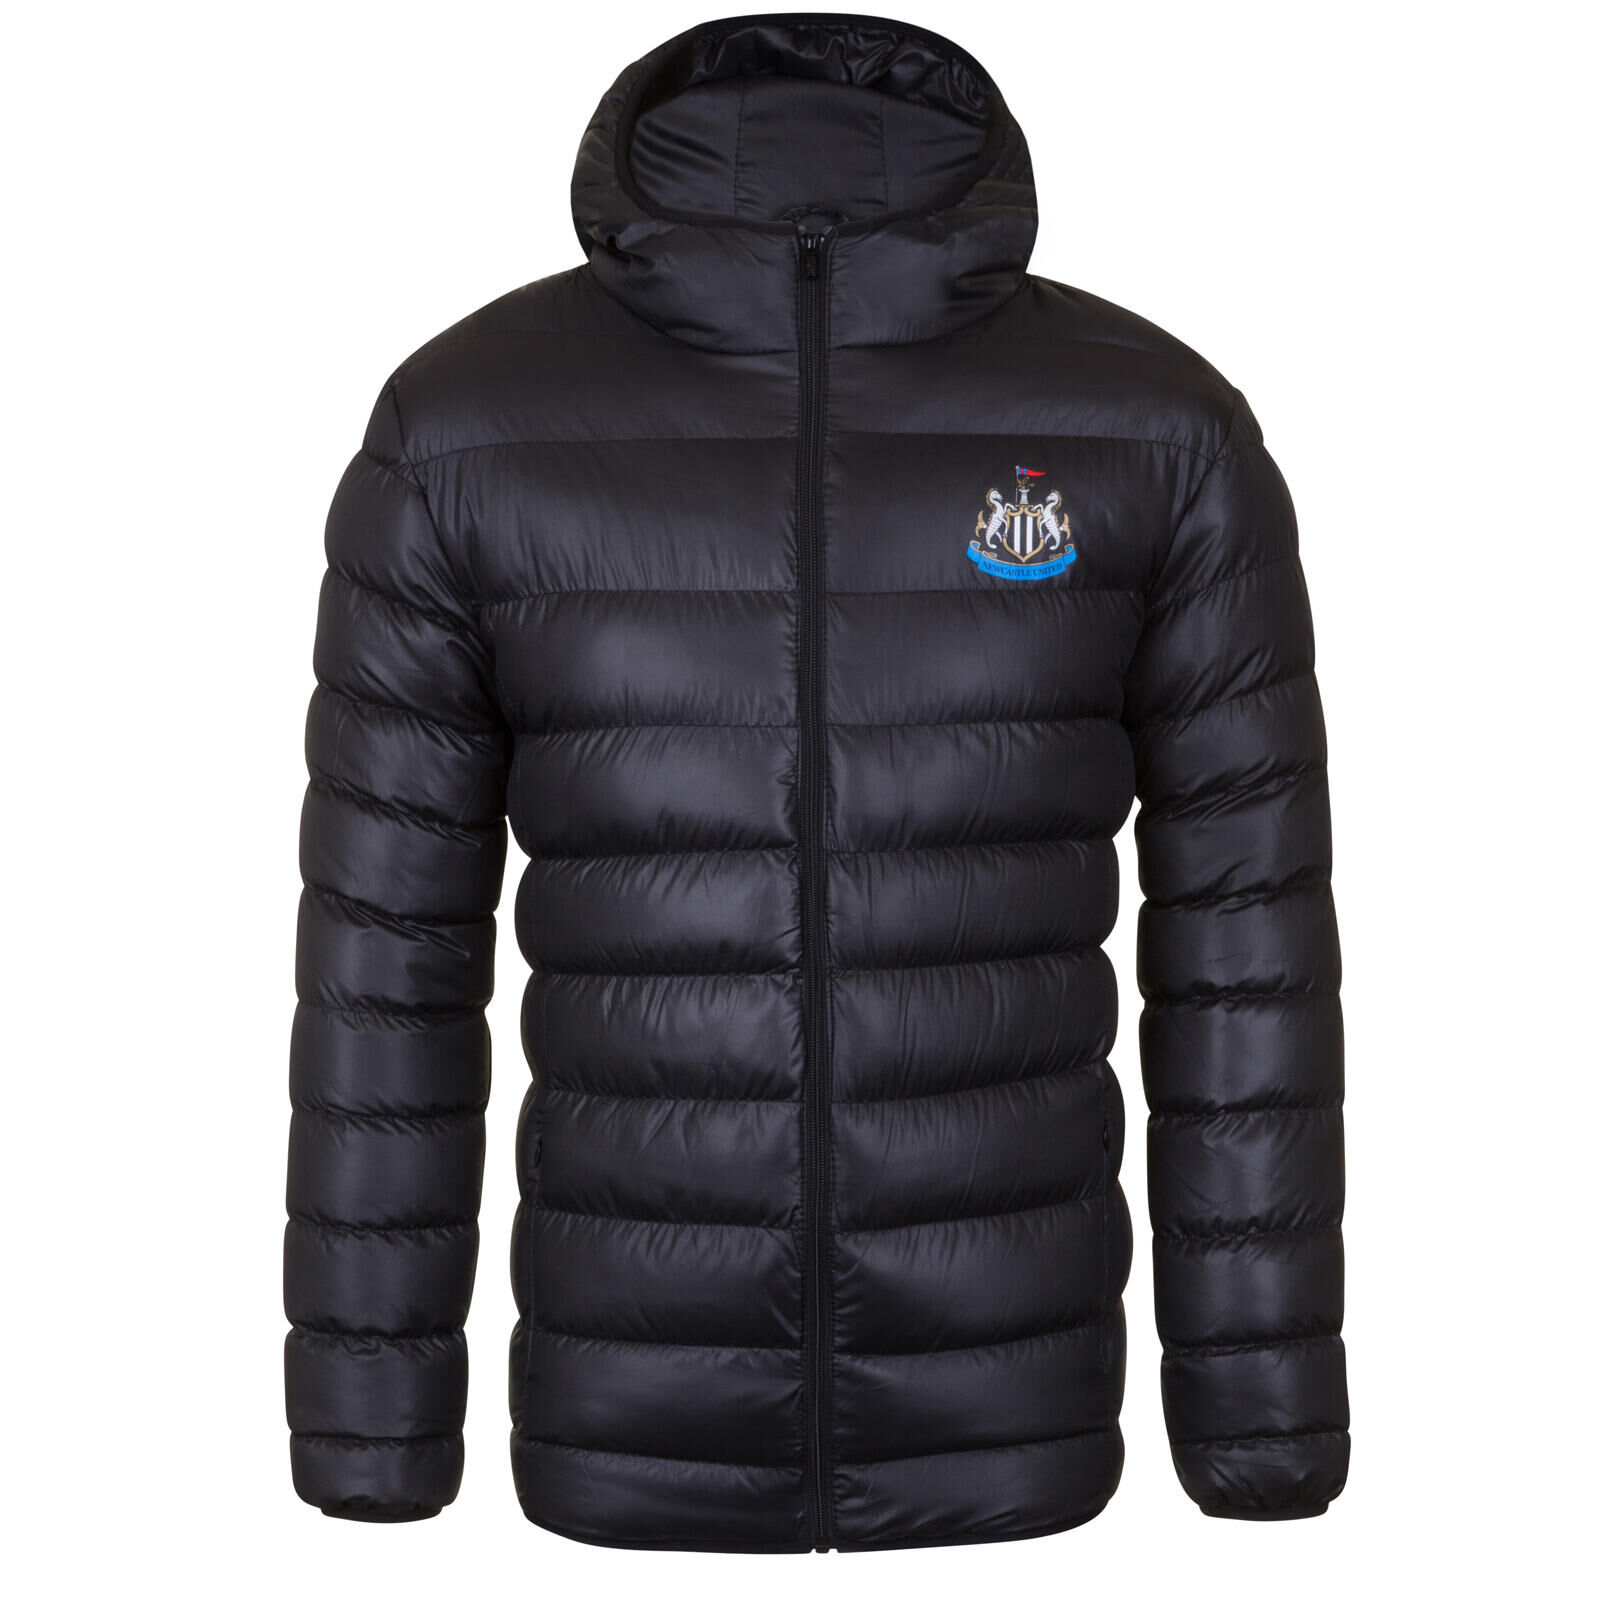 NEWCASTLE UNITED Newcastle United Mens Jacket Hooded Winter Quilted OFFICIAL Football Gift